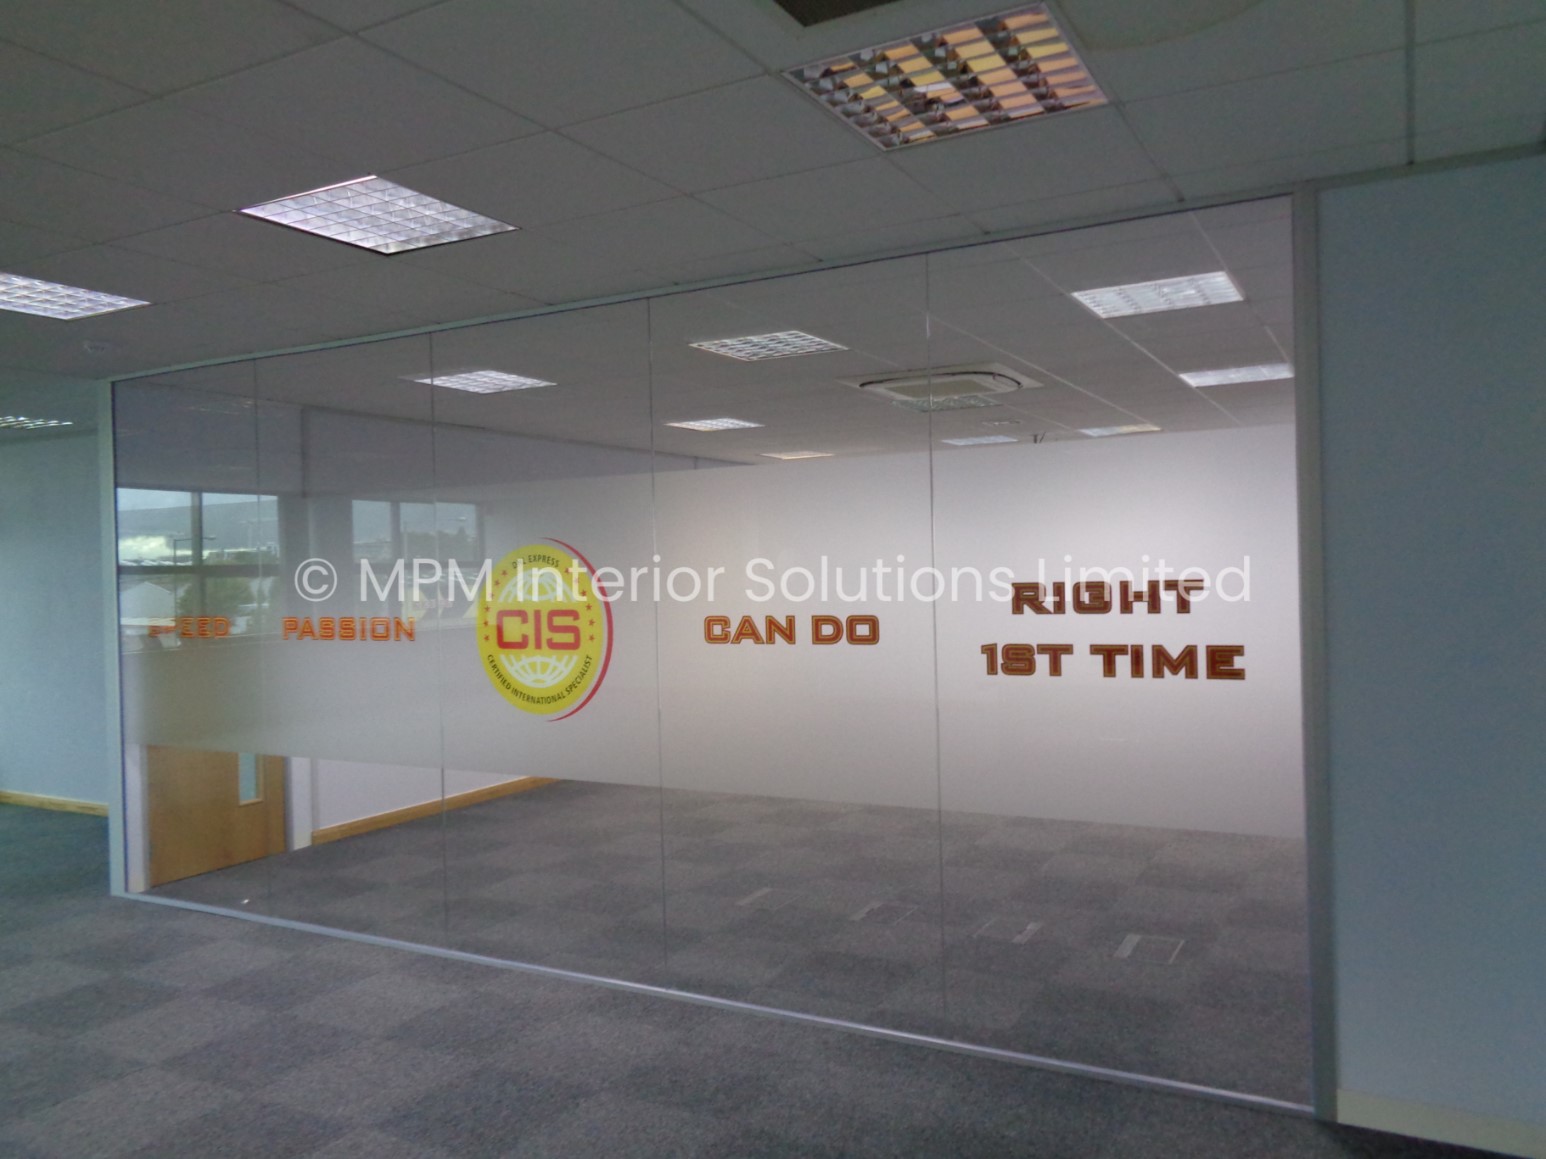 Frameless Glass Office Partitioning, 75mm > 100mm Demountable Office Partitioning, DHL International (UK) Ltd (Park Royal, London), MPM Interior Solutions Limited